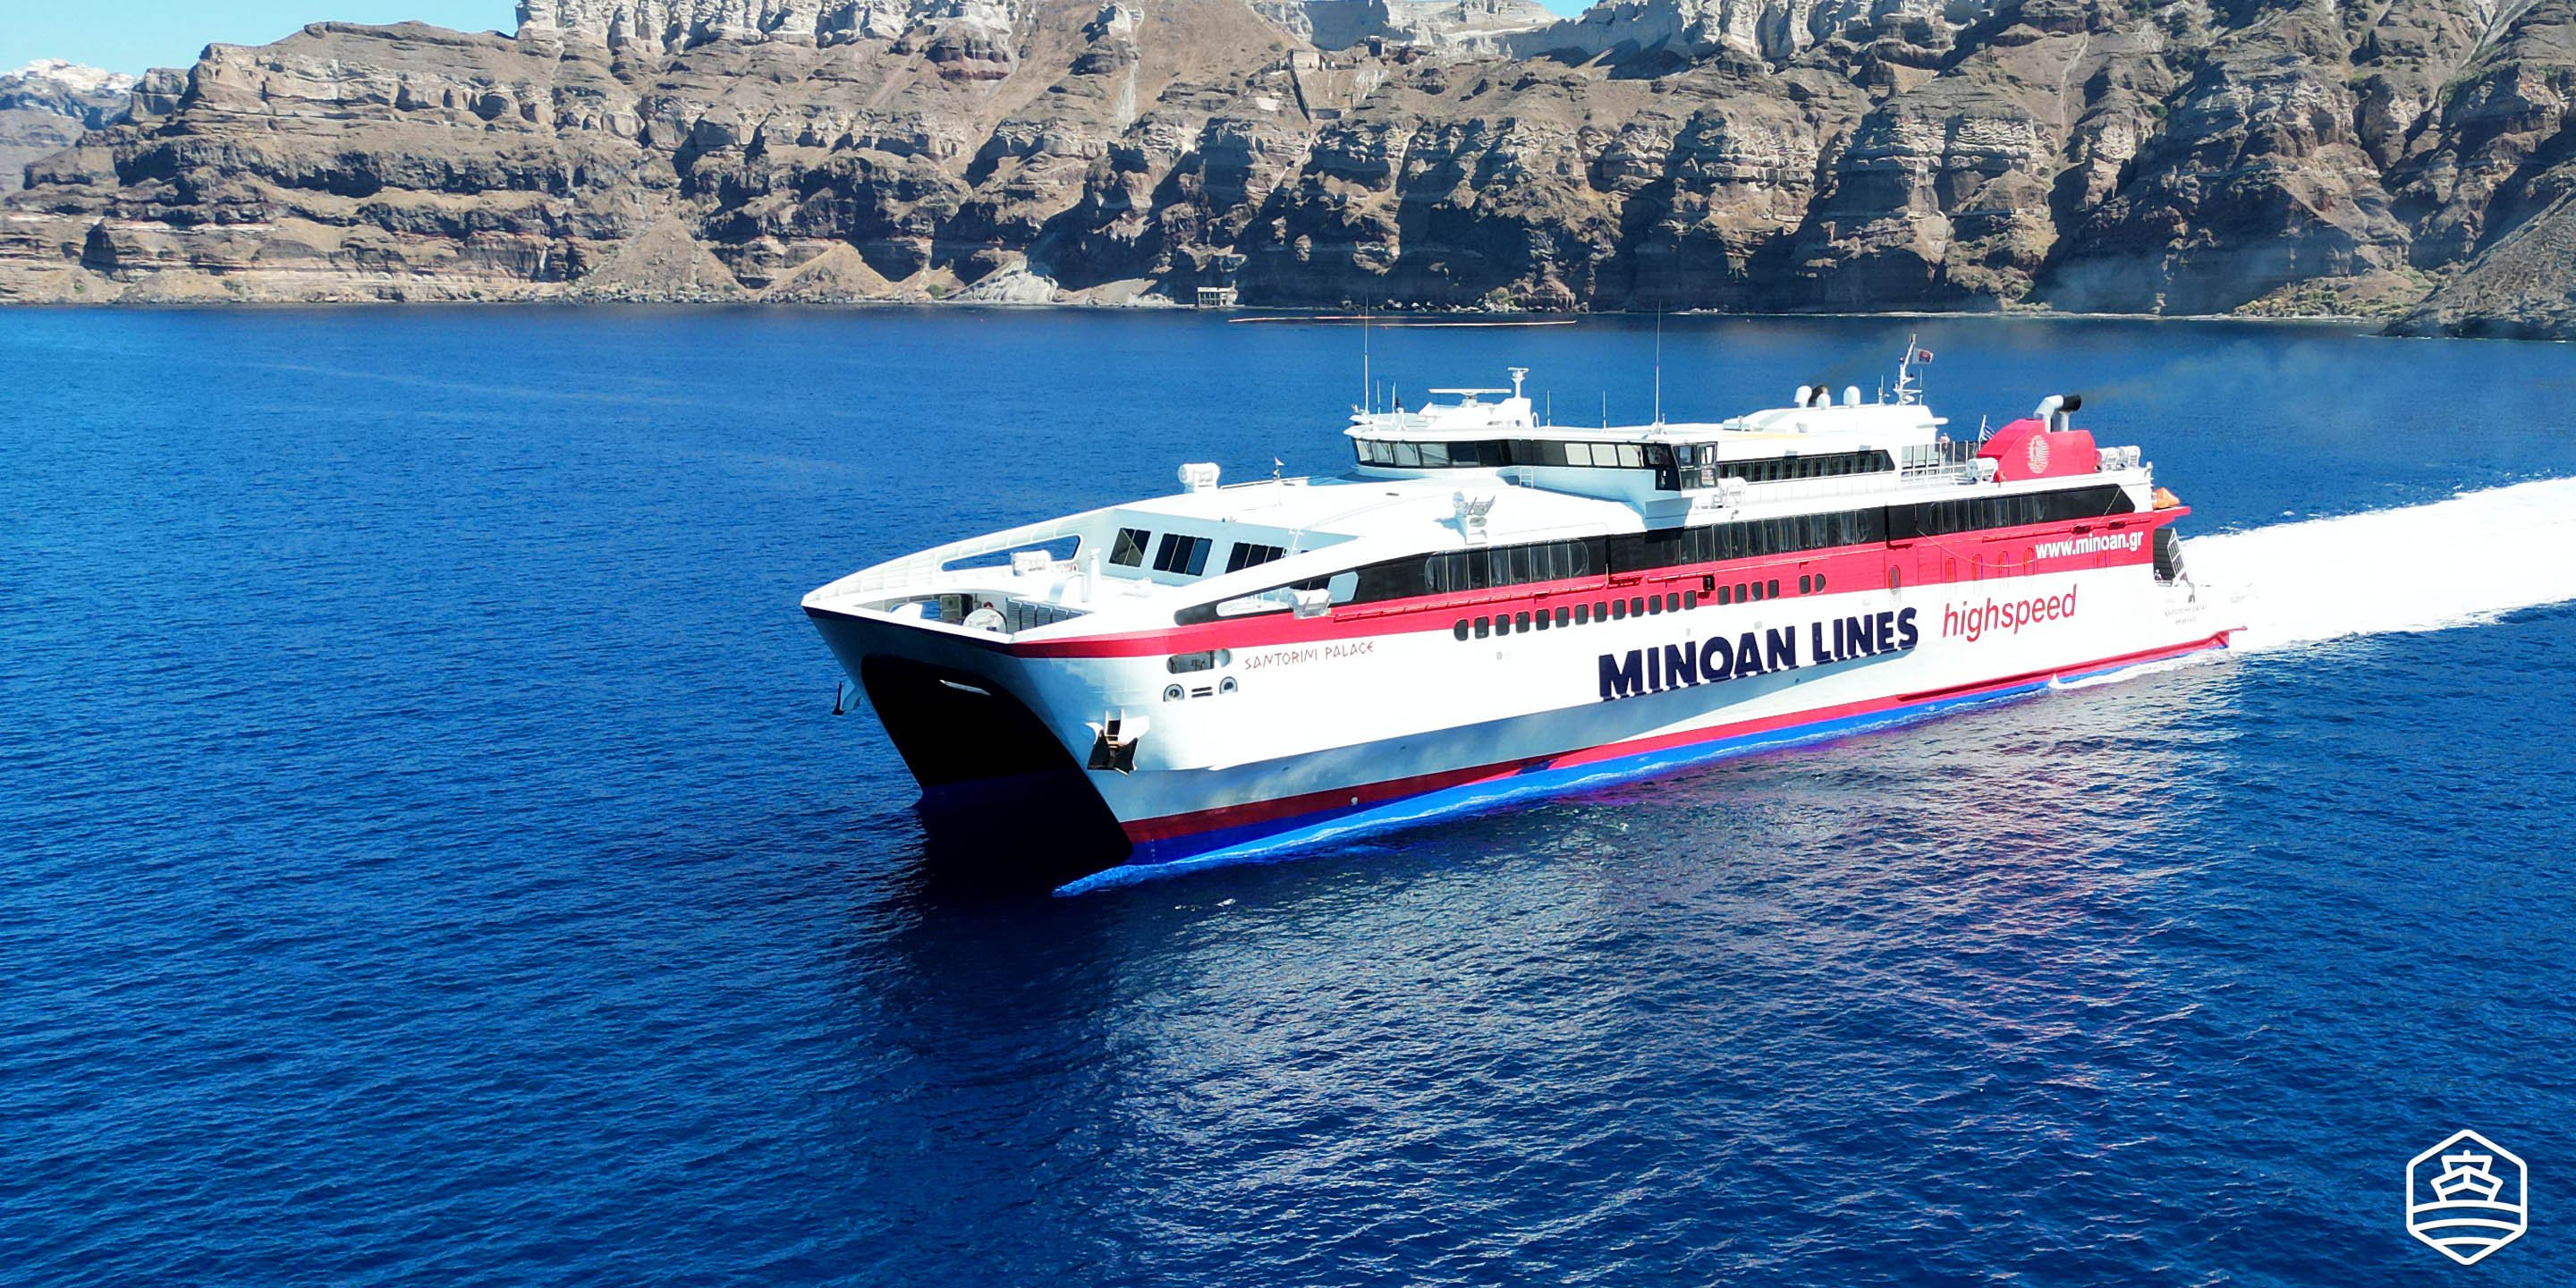 The high-speed ferry Santorini Palace of Minoan Lines doing the route from Santorini to Crete Heraklion